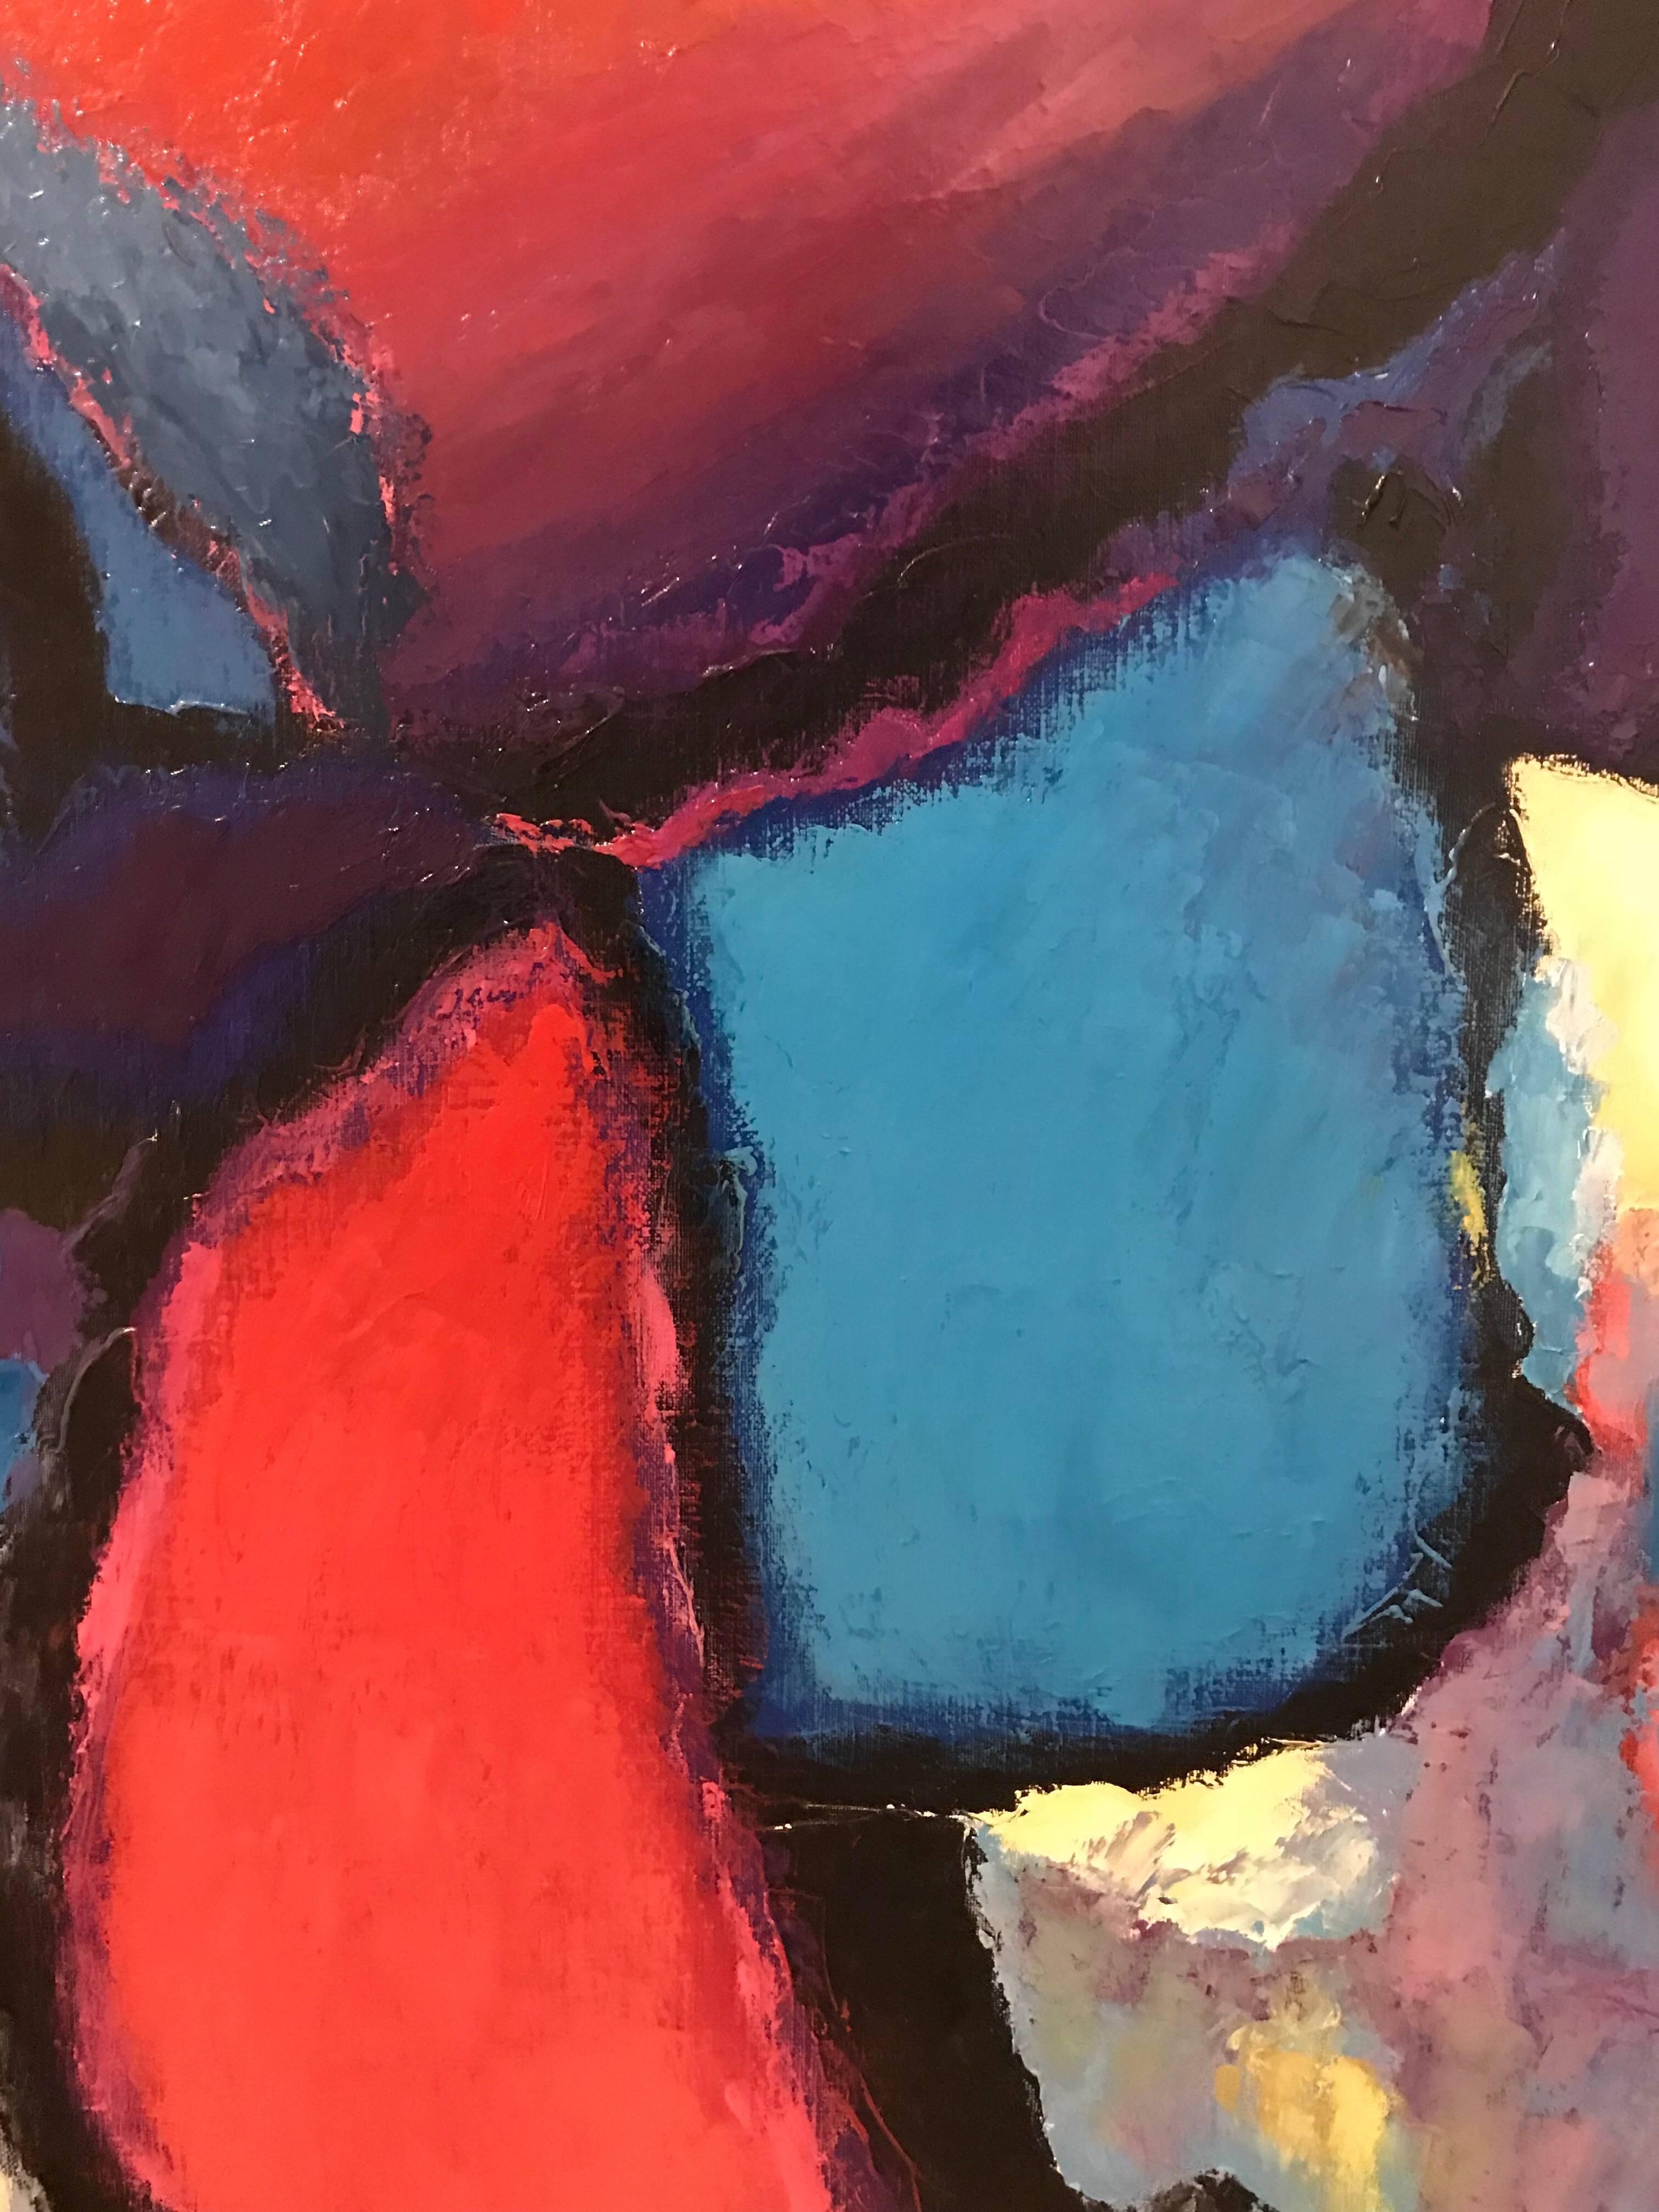 Superb large scale French abstract oil painting by the popular 20th century French painter, Andre Copin (1911-1998). The painting is signed to the lower corner and dates to circa 1988. 

The work displays an incredible range of colors - deep reds,